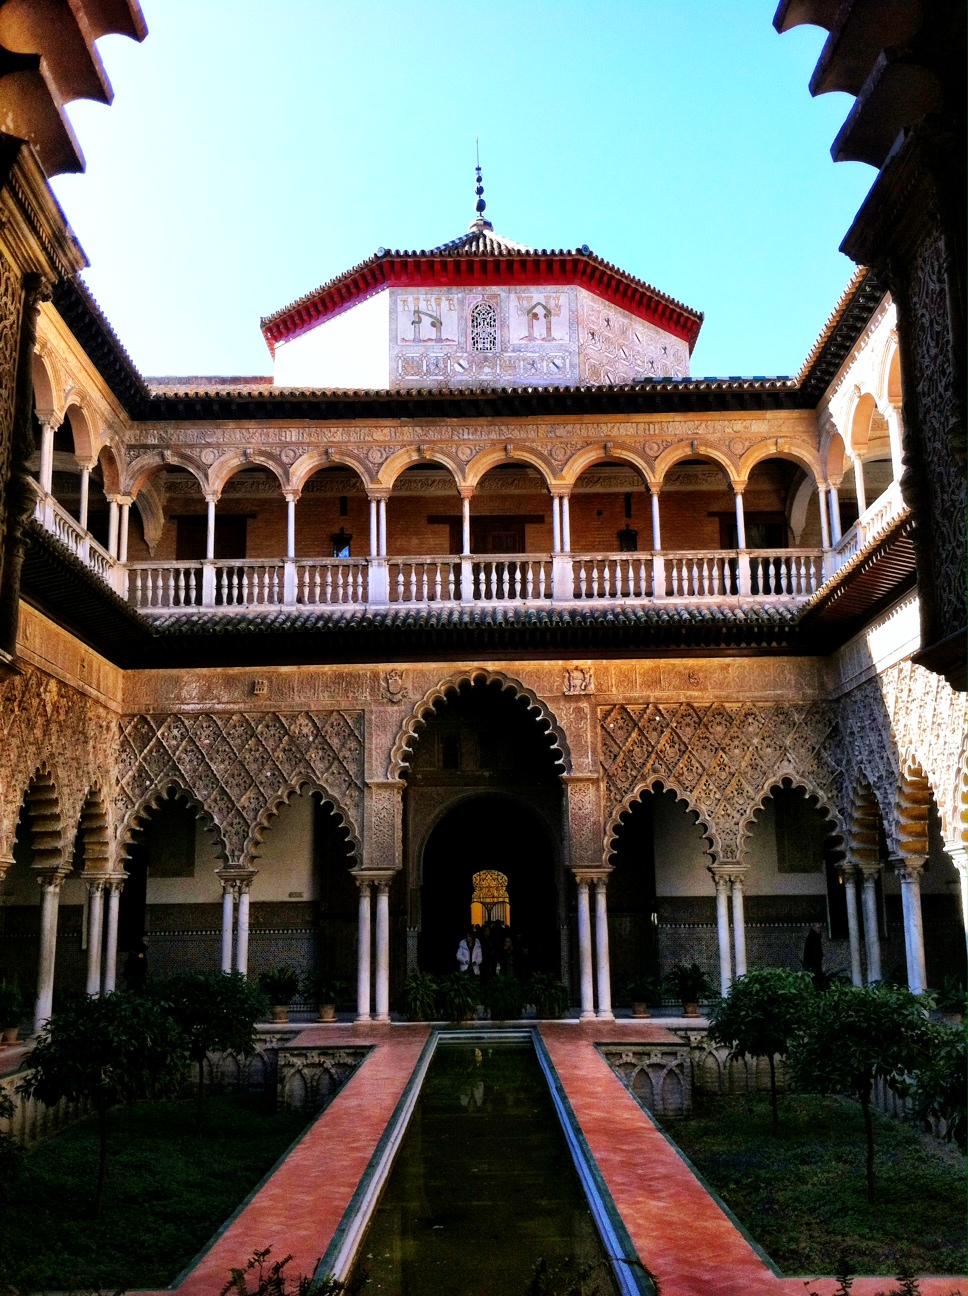 The Beauty of the Palace of The Royal Alcazars of Seville